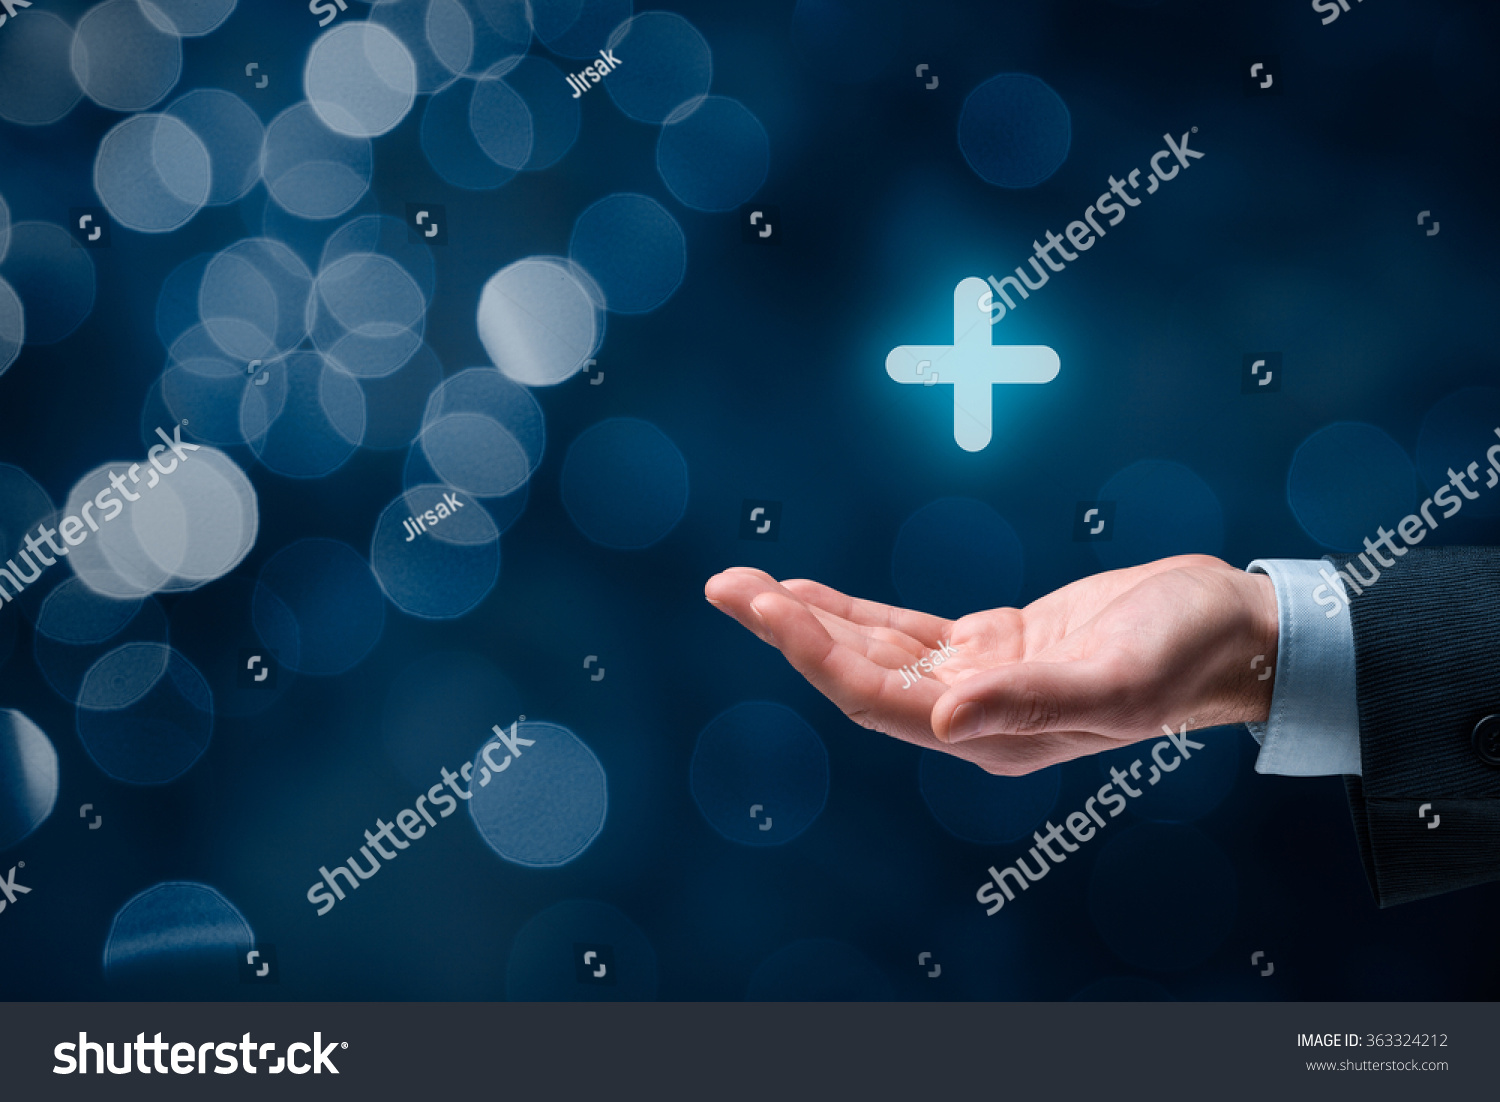 Businessman offer positive thing (like benefits, personal development, social networking) represented by plus sign, bokeh in background.
 #363324212